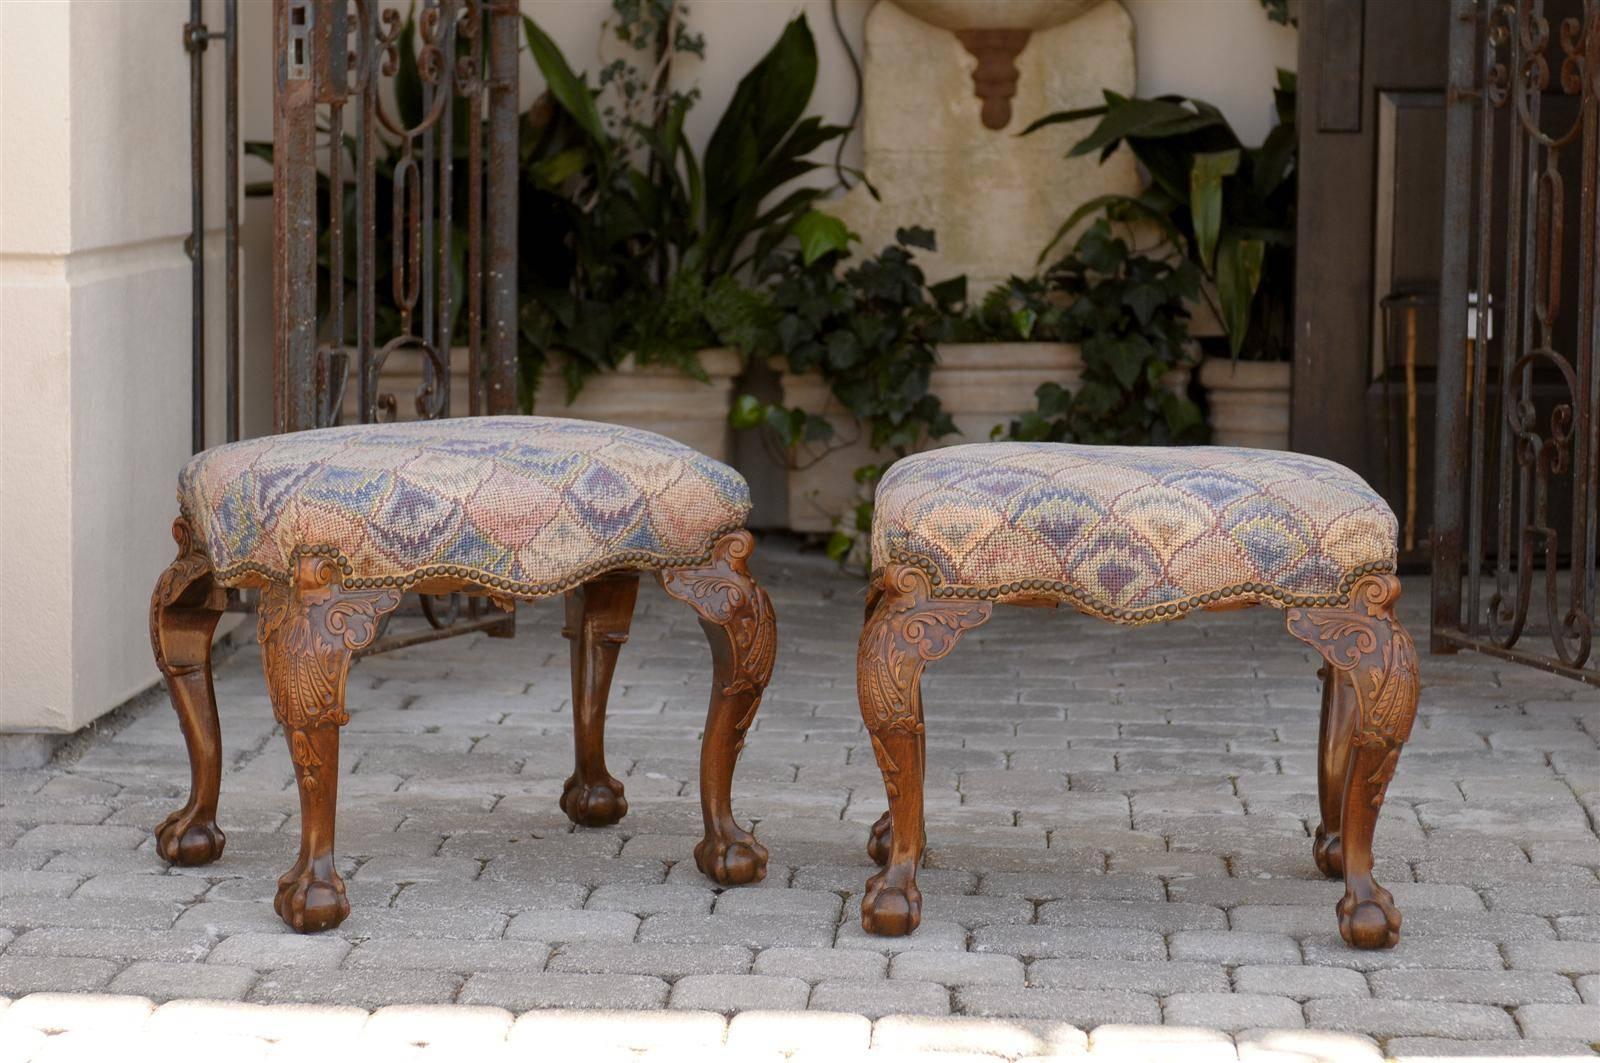 This pair of English Early Georgian style wooden stools from the mid 19th century features rectangular needlepoint upholstered seats with blue, pink and purple tones and nailhead trim. The stools are raised on exquisite carved wood cabriole legs,